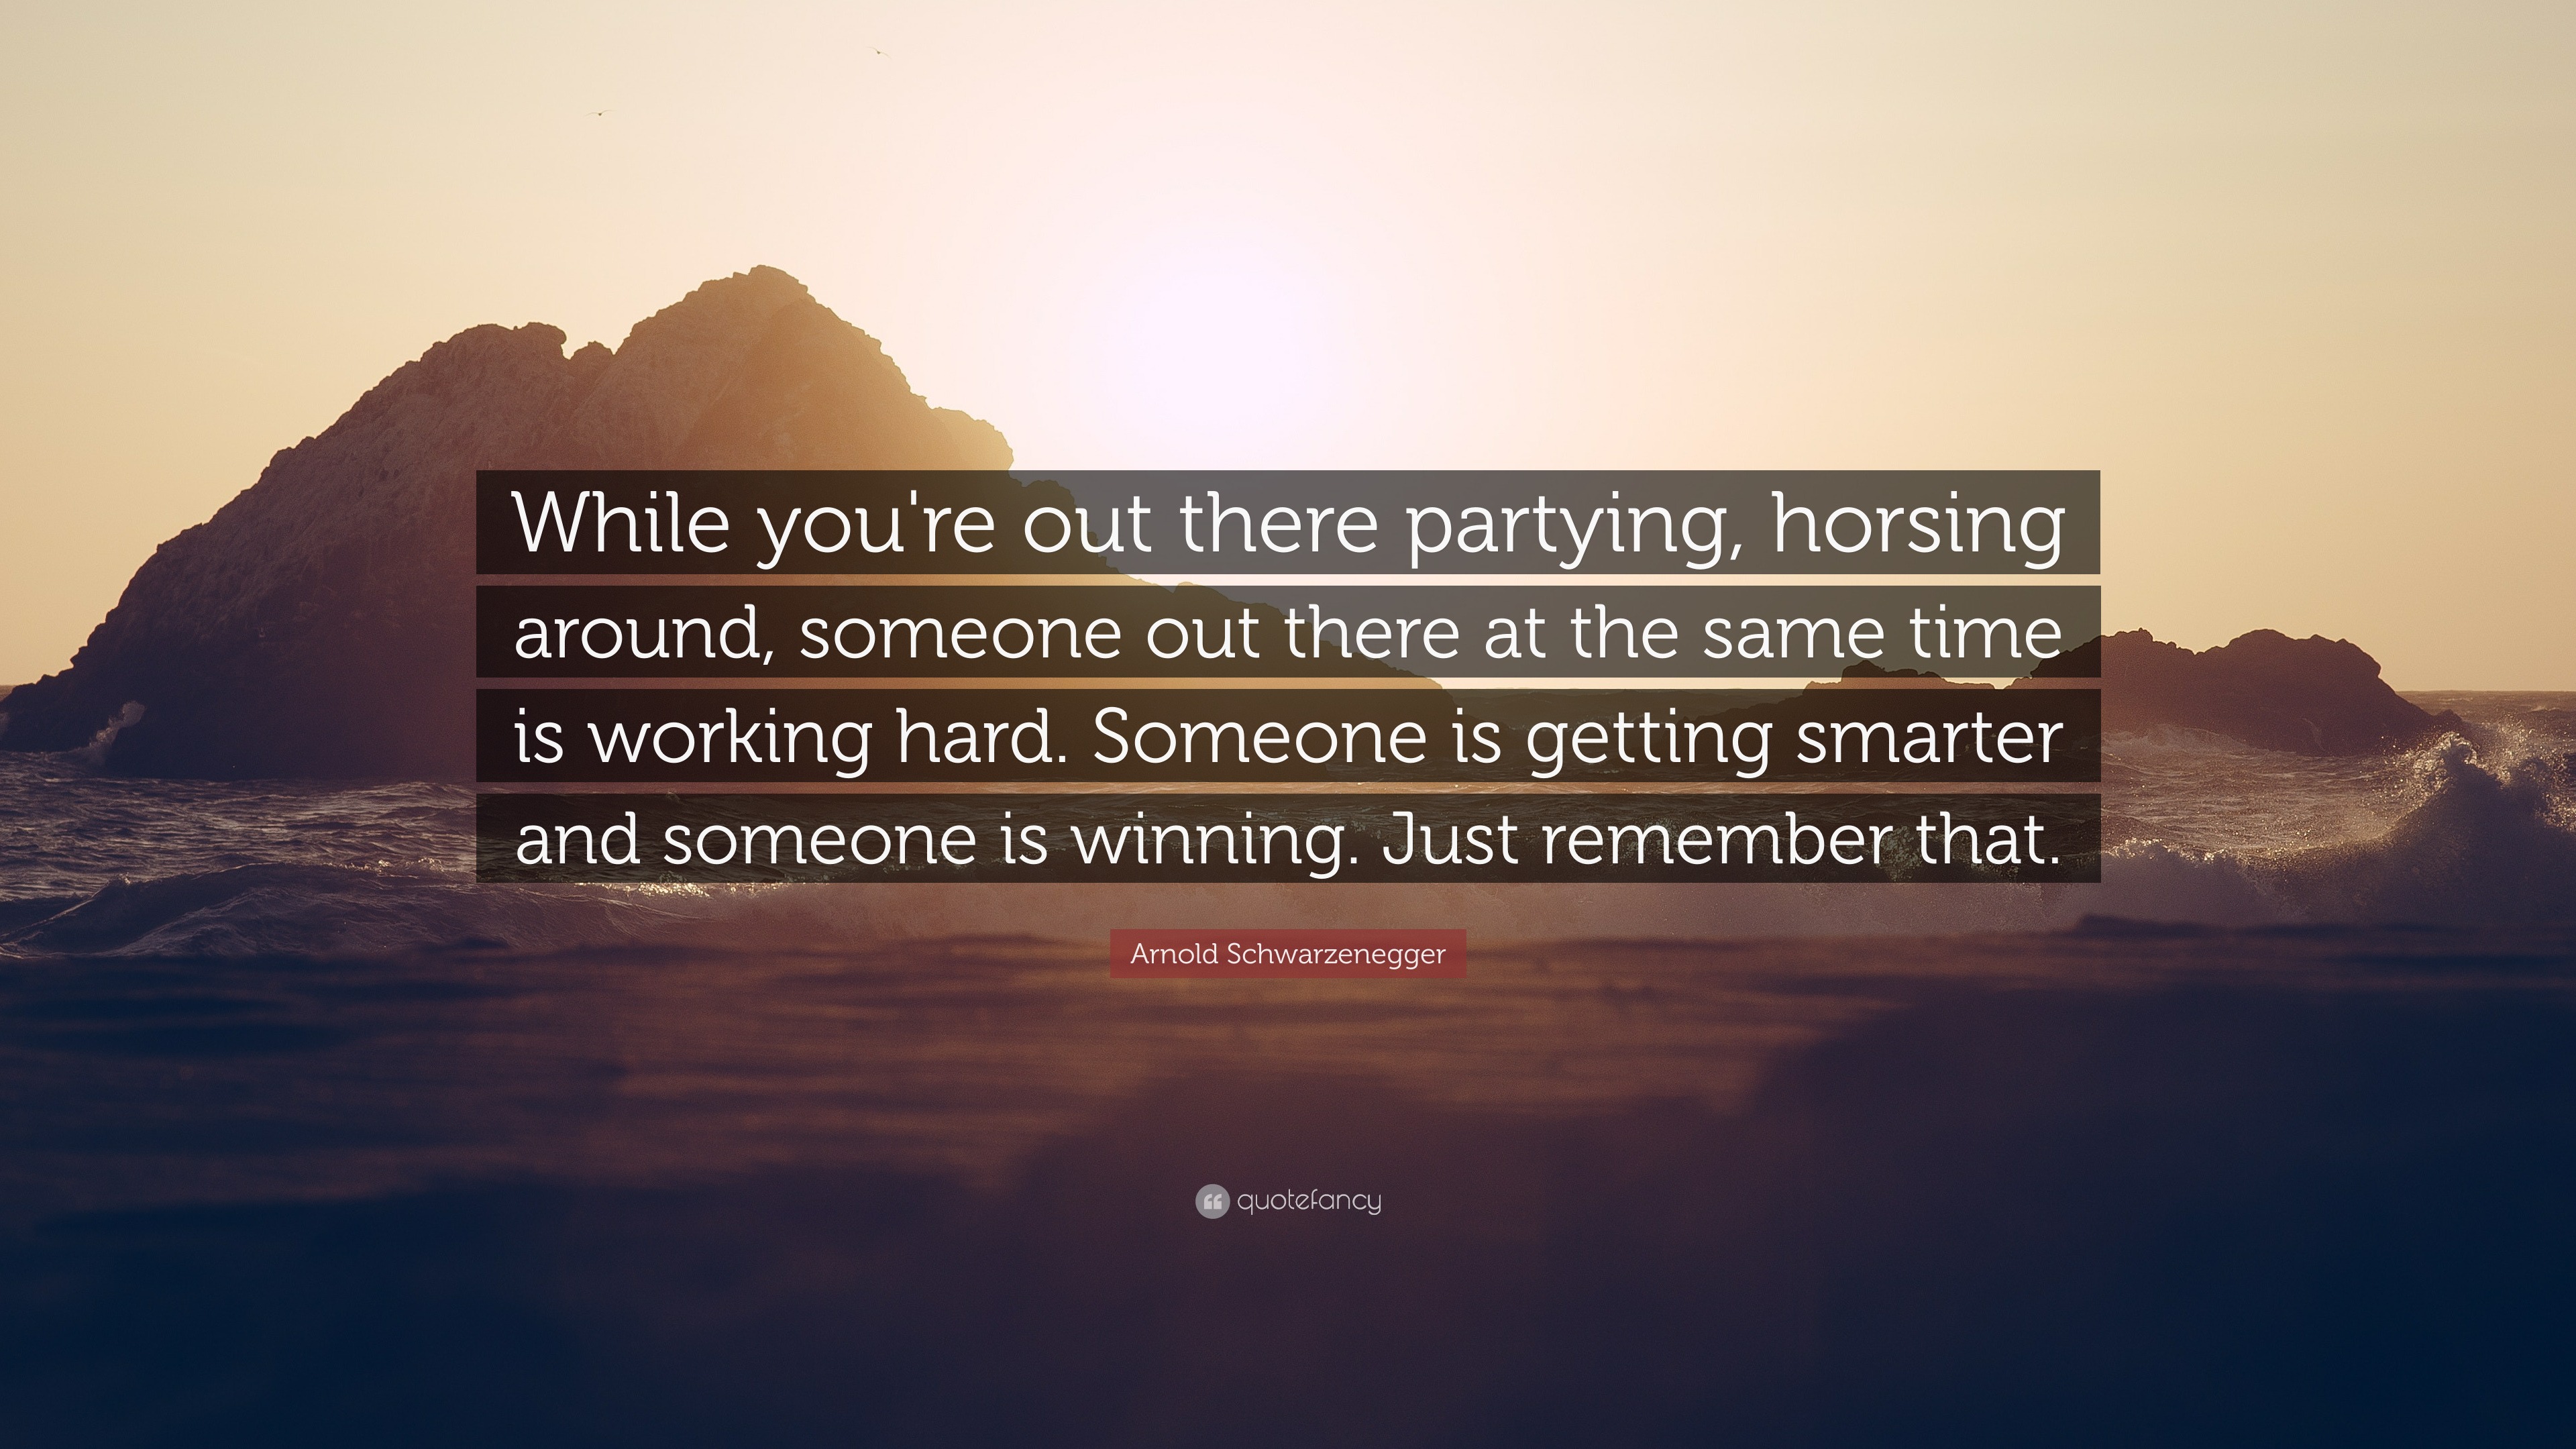 Arnold Schwarzenegger Quote: “While you're out there partying, horsing